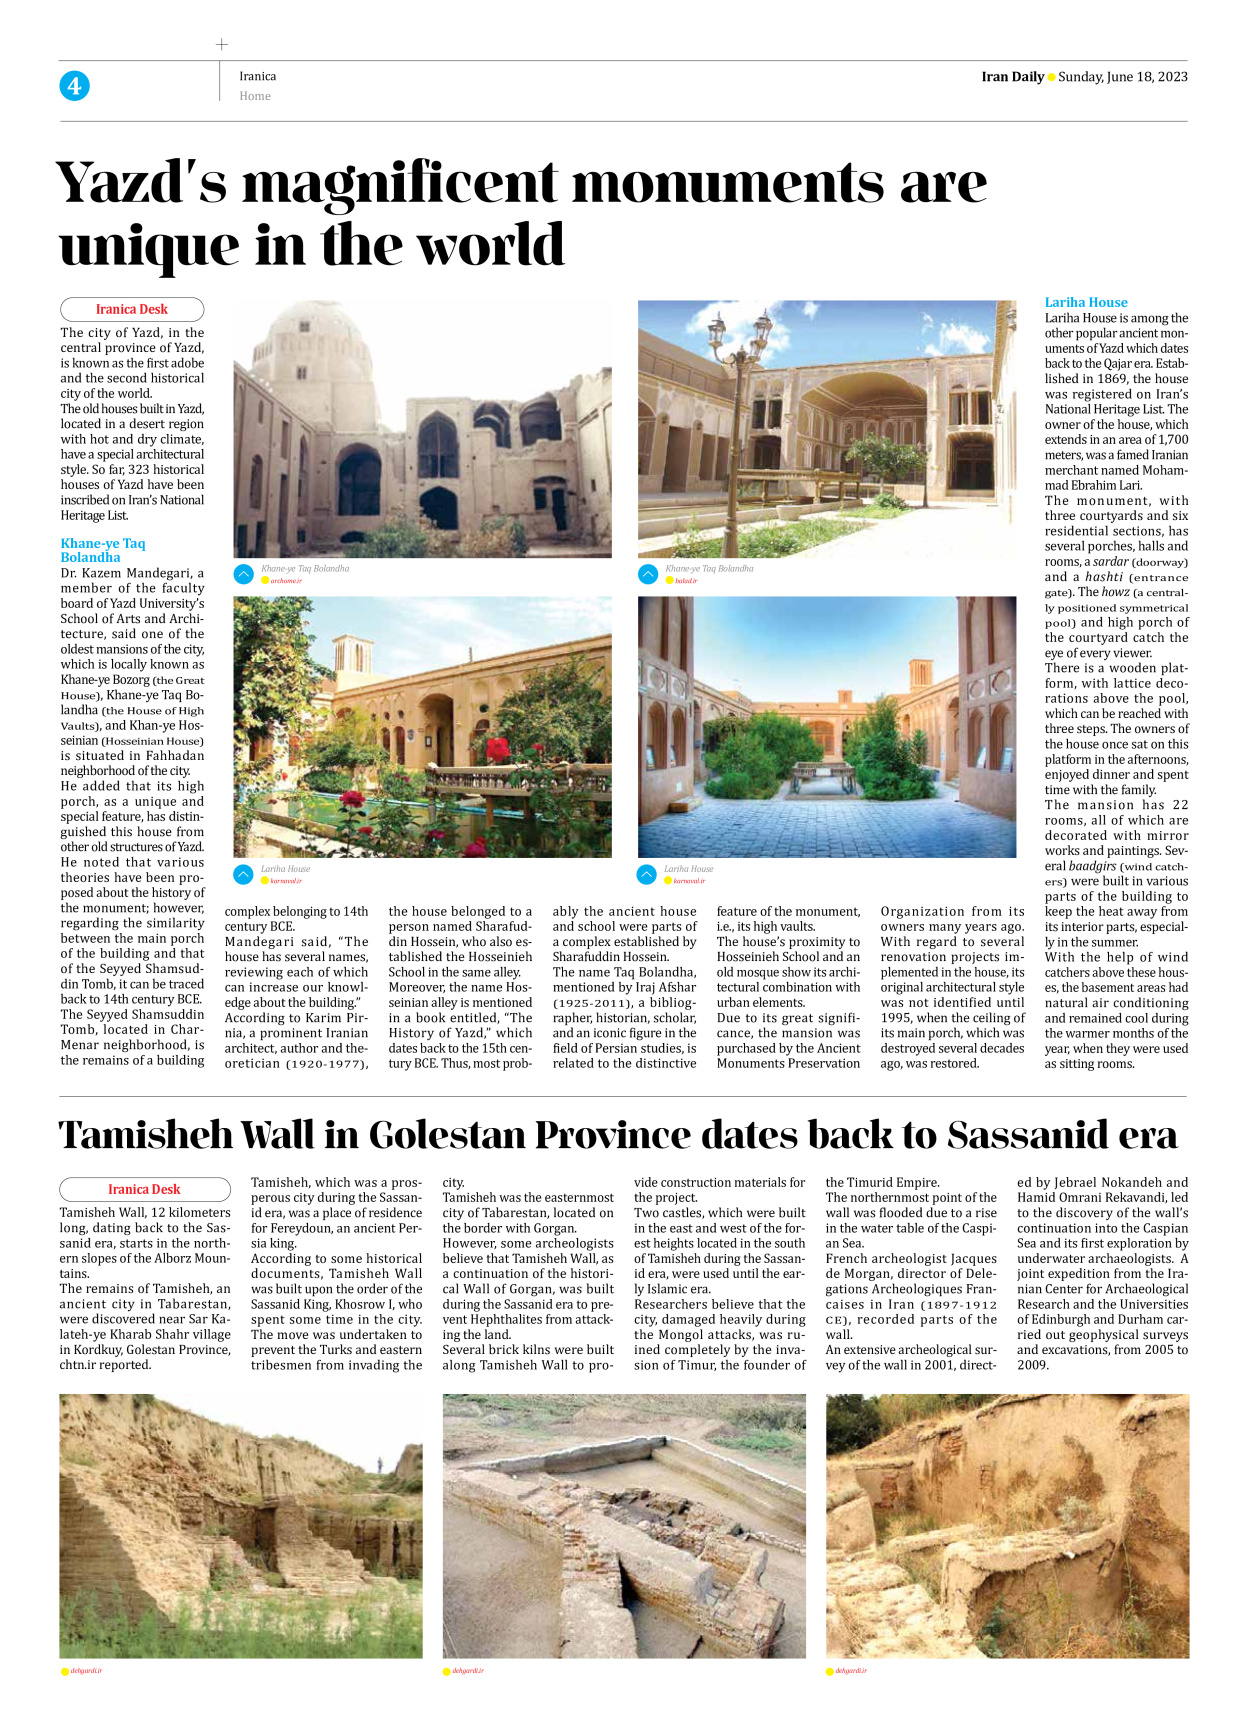 Iran Daily - Number Seven Thousand Three Hundred and Seventeen - 18 June 2023 - Page 4